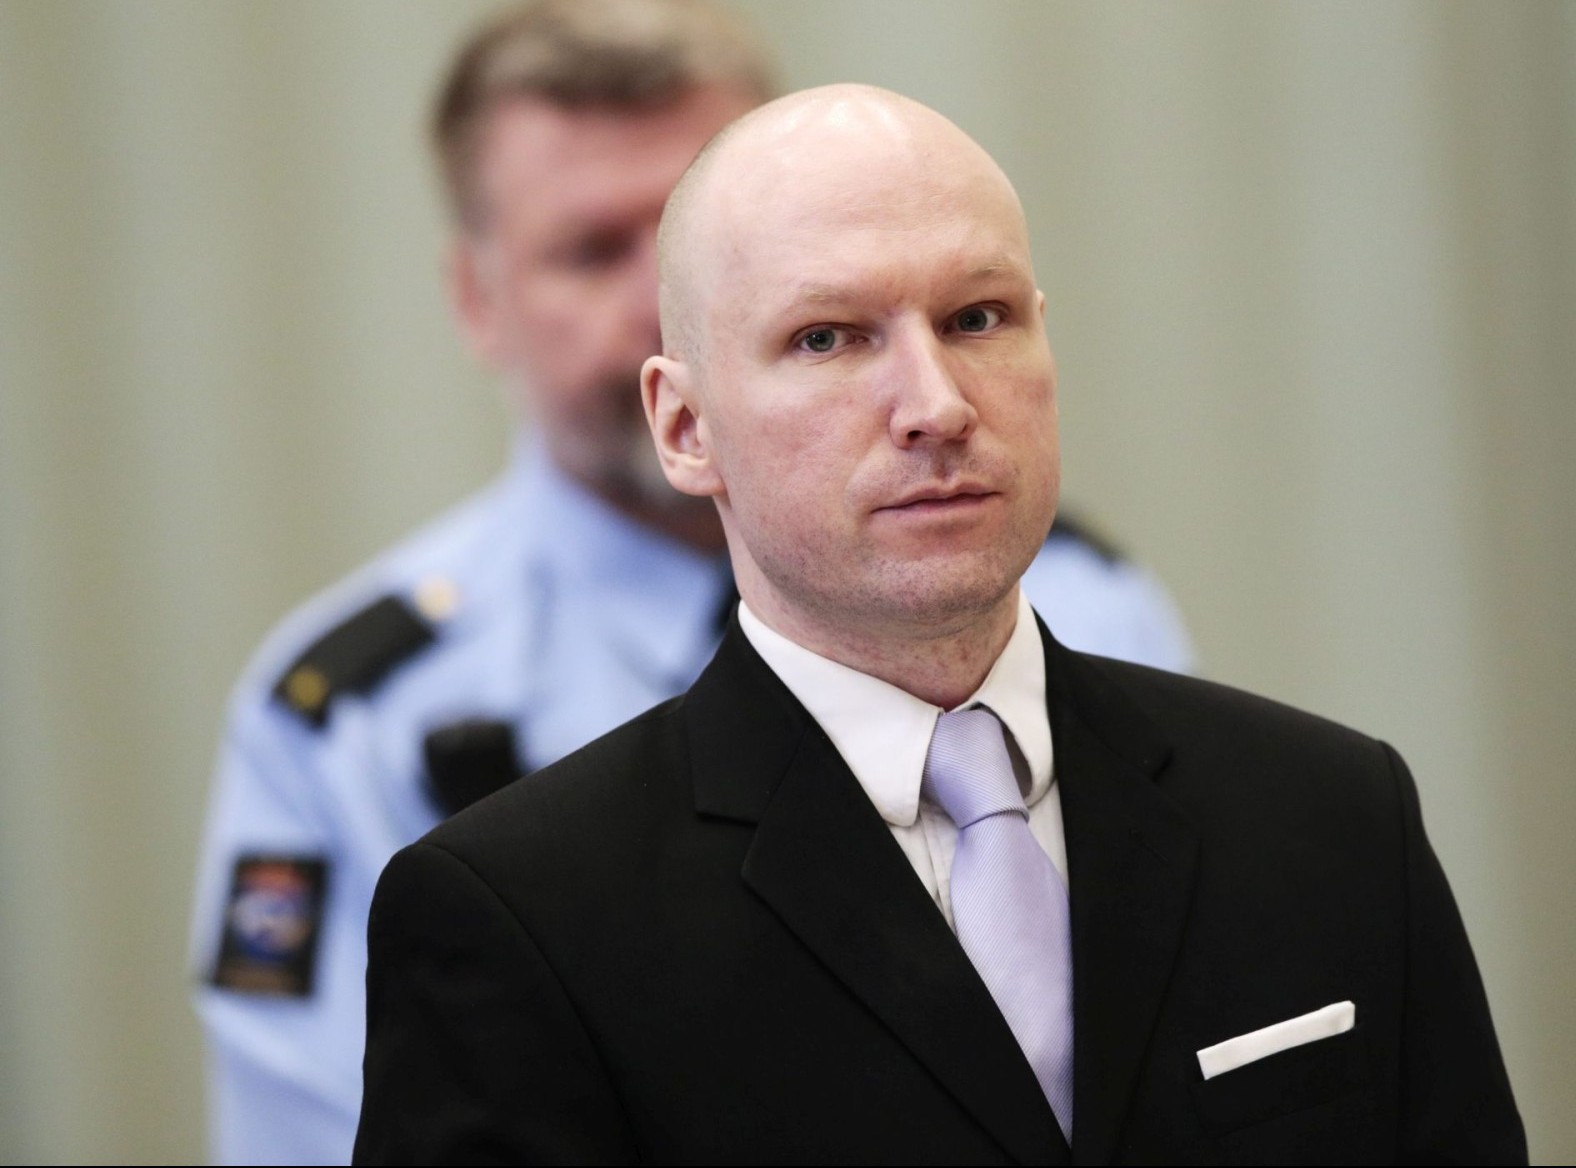 epa05268702 (FILE) A file photo dated 18 March 2016 showing convicted mass killer Anders Behring Breivik attending the fourth and last day in court in Skien prison, Norway. A Norwegian court on 20 April 2016 found that Norwegian authorities are violating his human rights by holding him in isolation for almost five years. The right-wing mass murderer, who committed the July 2011 Norway attacks that claimed the lives of 77 people, accused the government of his country of trying to kill him by putting him in solitary confinement after he was convicted.  EPA/LISE ASERUD NORWAY OUT